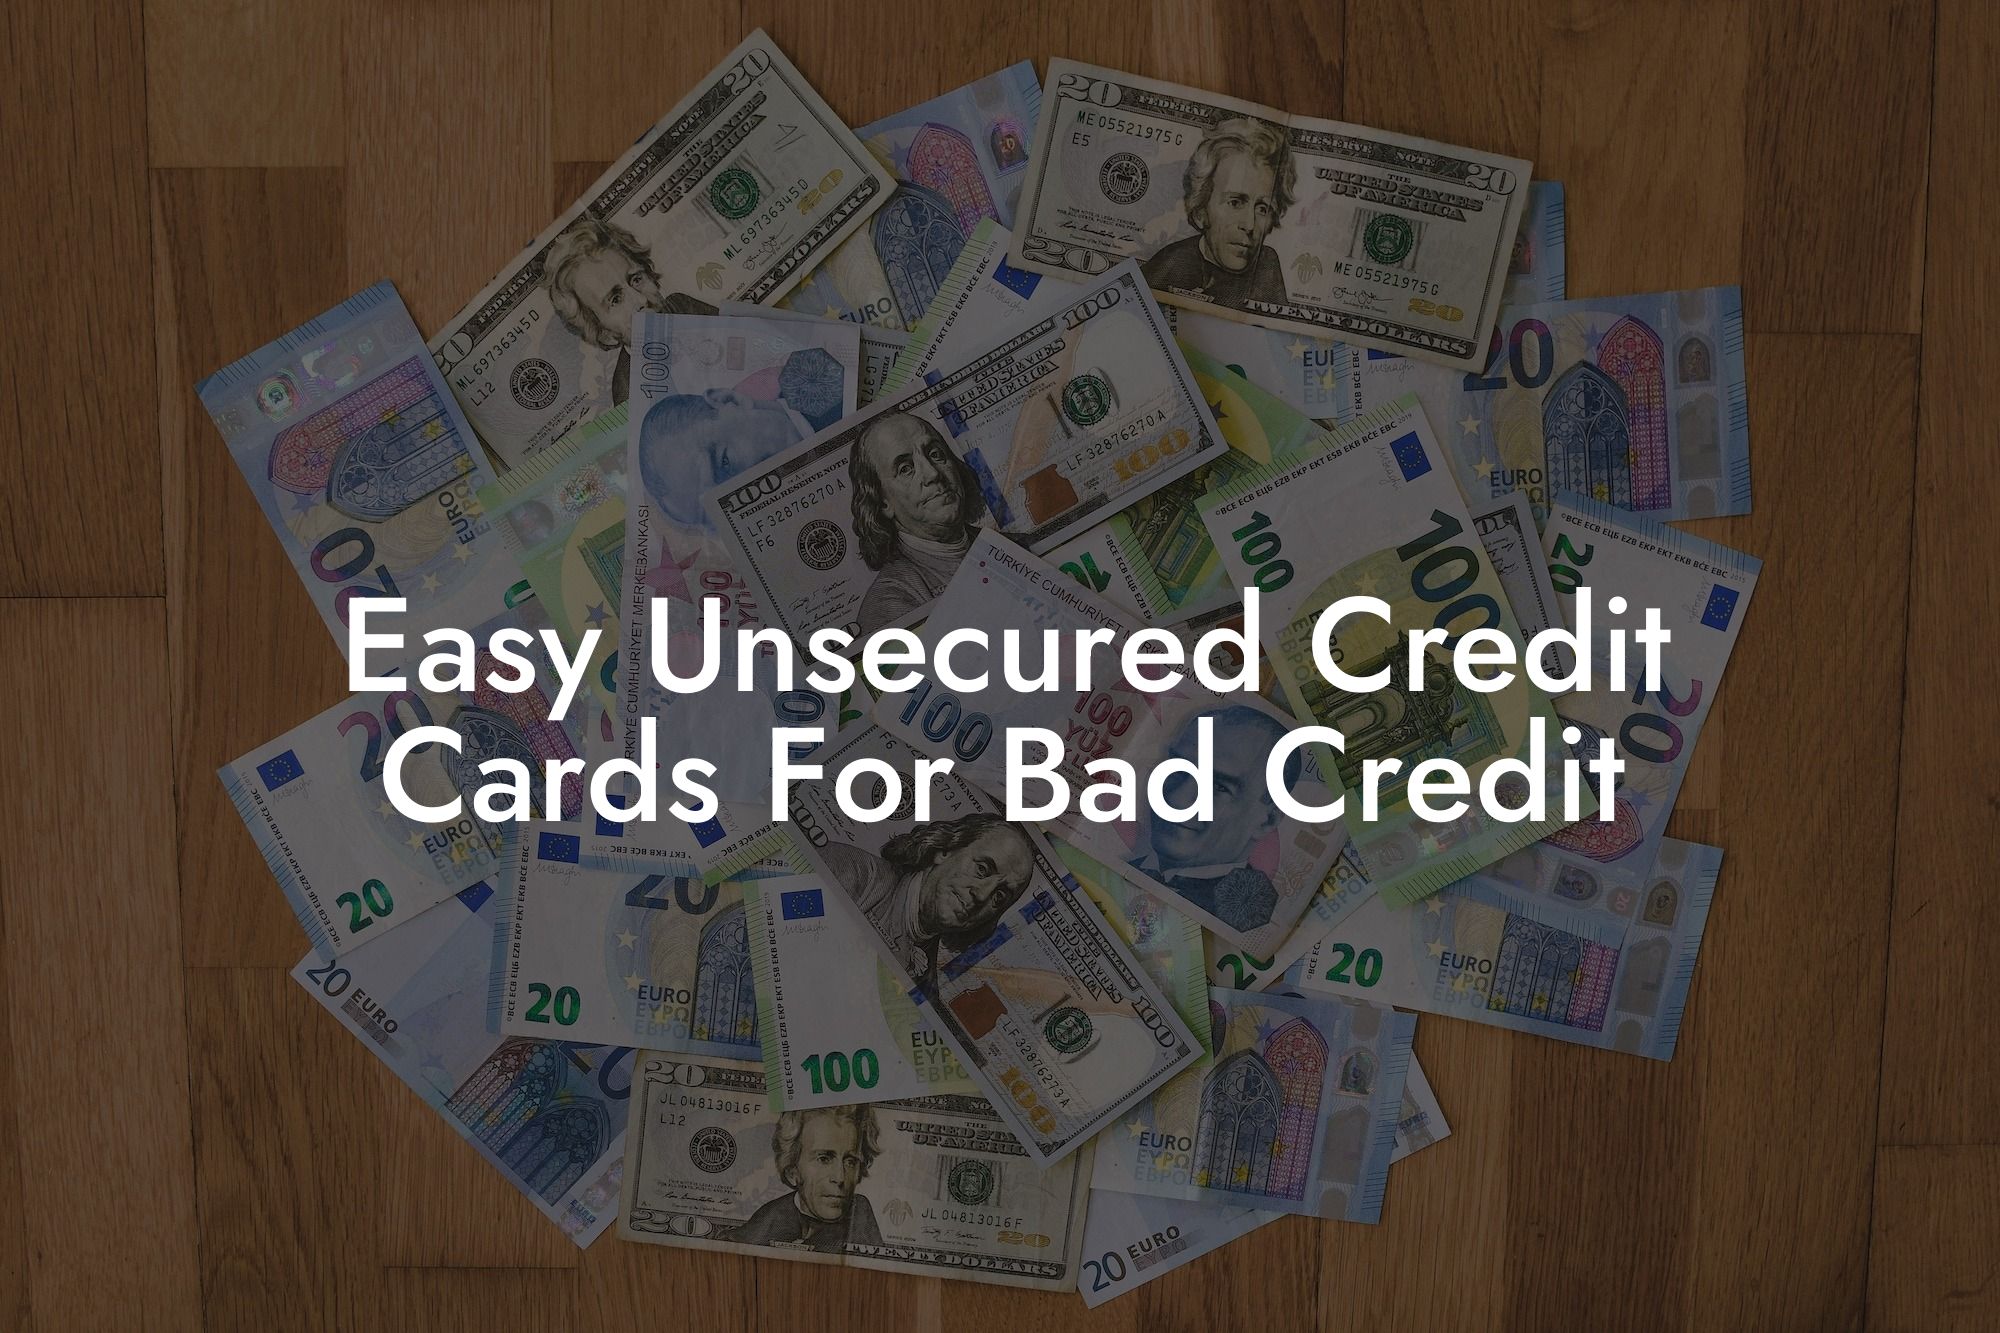 Easy Unsecured Credit Cards For Bad Credit